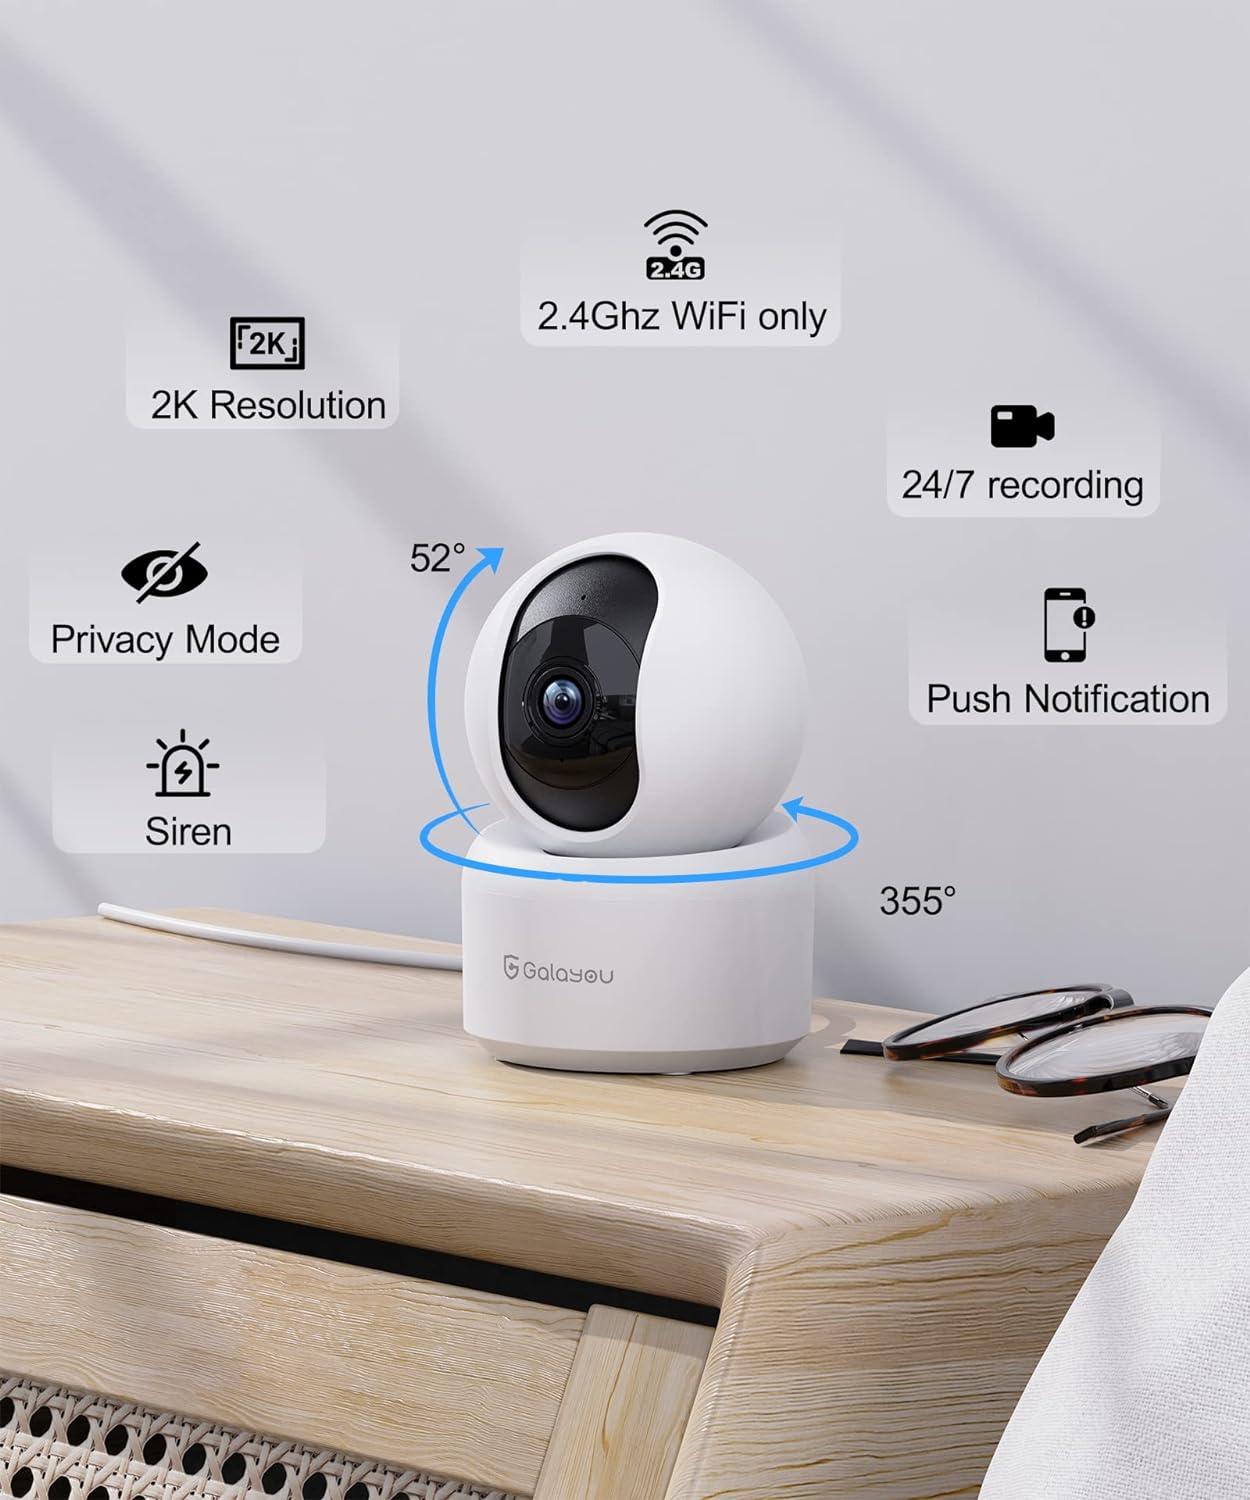 Mi Home Security Camera 360 ° 2K for a safe and smart home